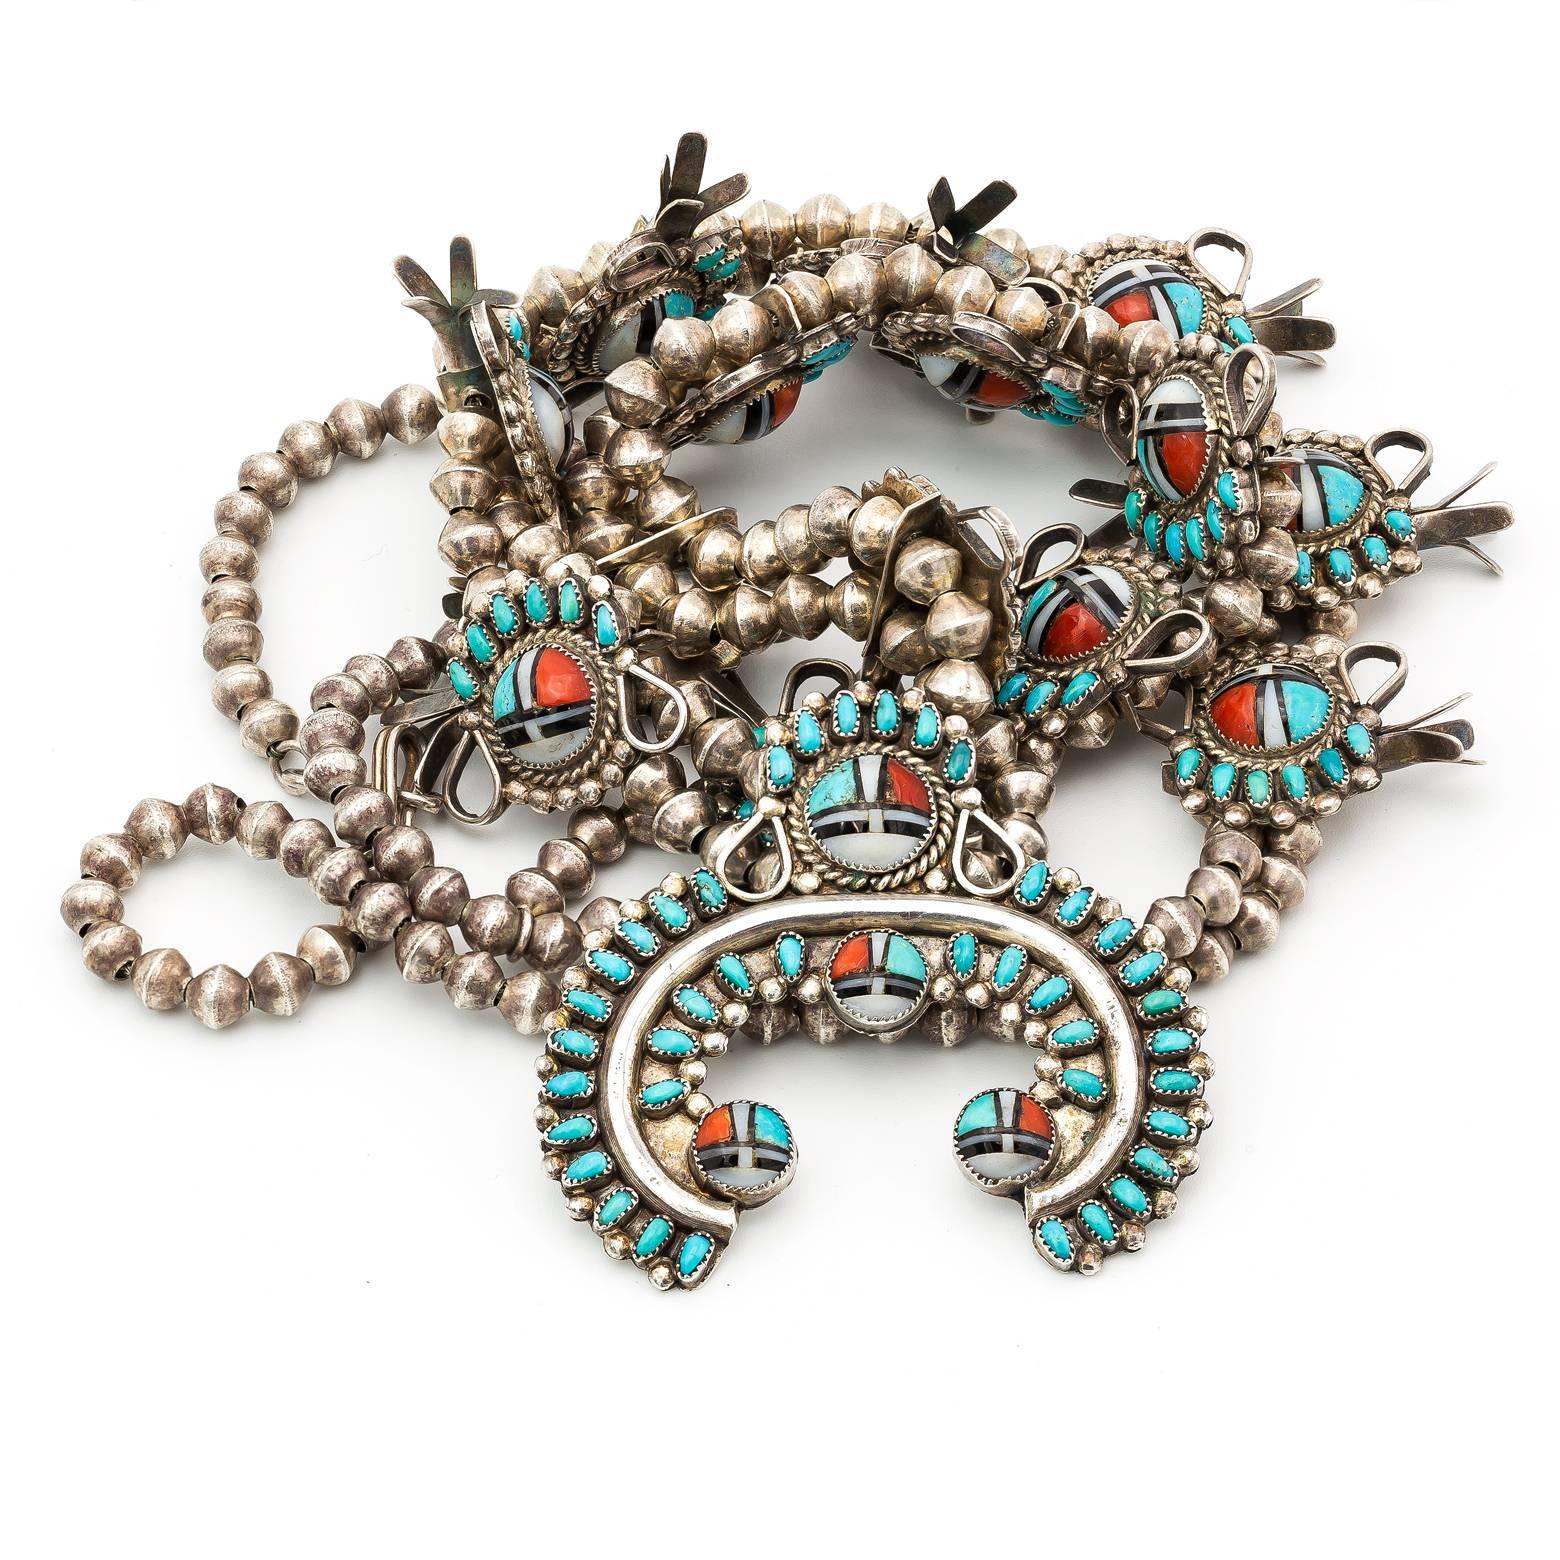 Native American Zuni Inlay Squash Blossom Necklace in Sterling Silver with Turquoise and Coral